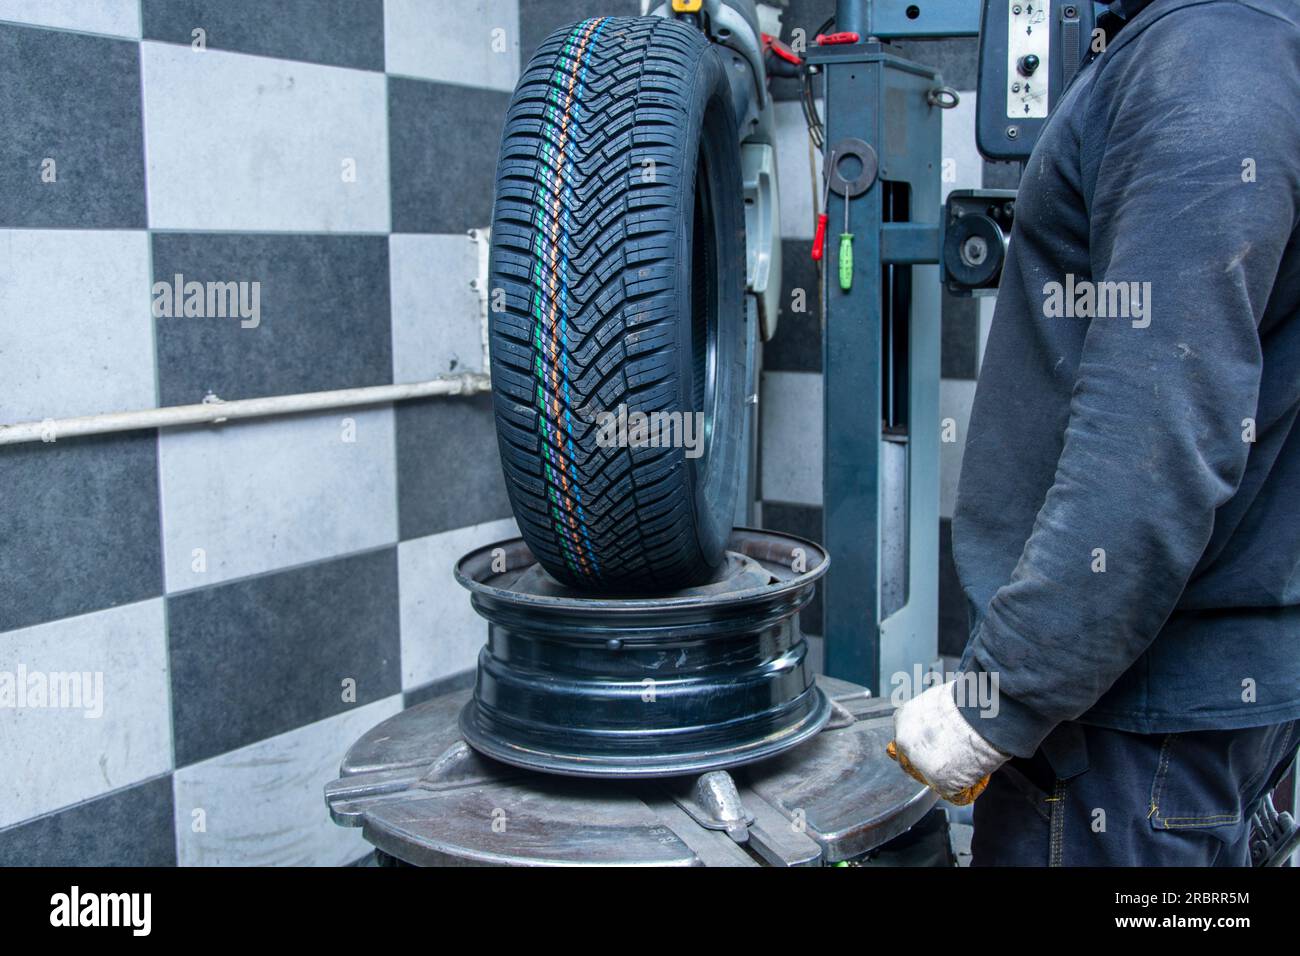 The service person prepares the rim before installing the new wheel Stock Photo